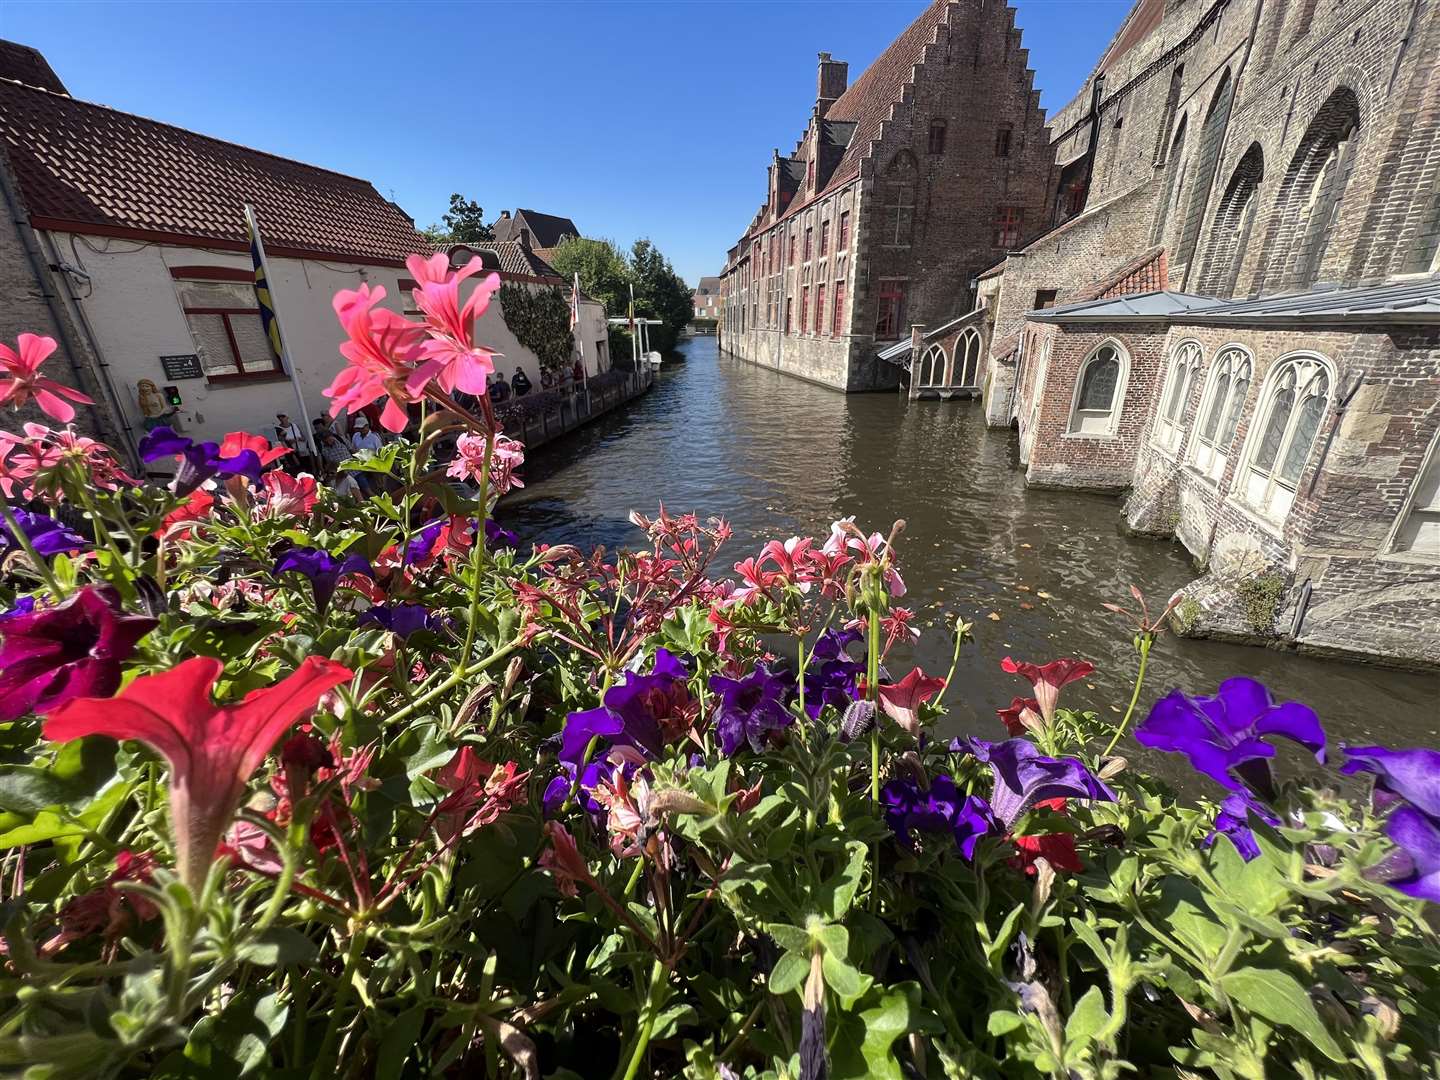 Bruges with its many picturesque canals and small bridges is is known as the Venice of the North. All pictures by Barry Goodwin